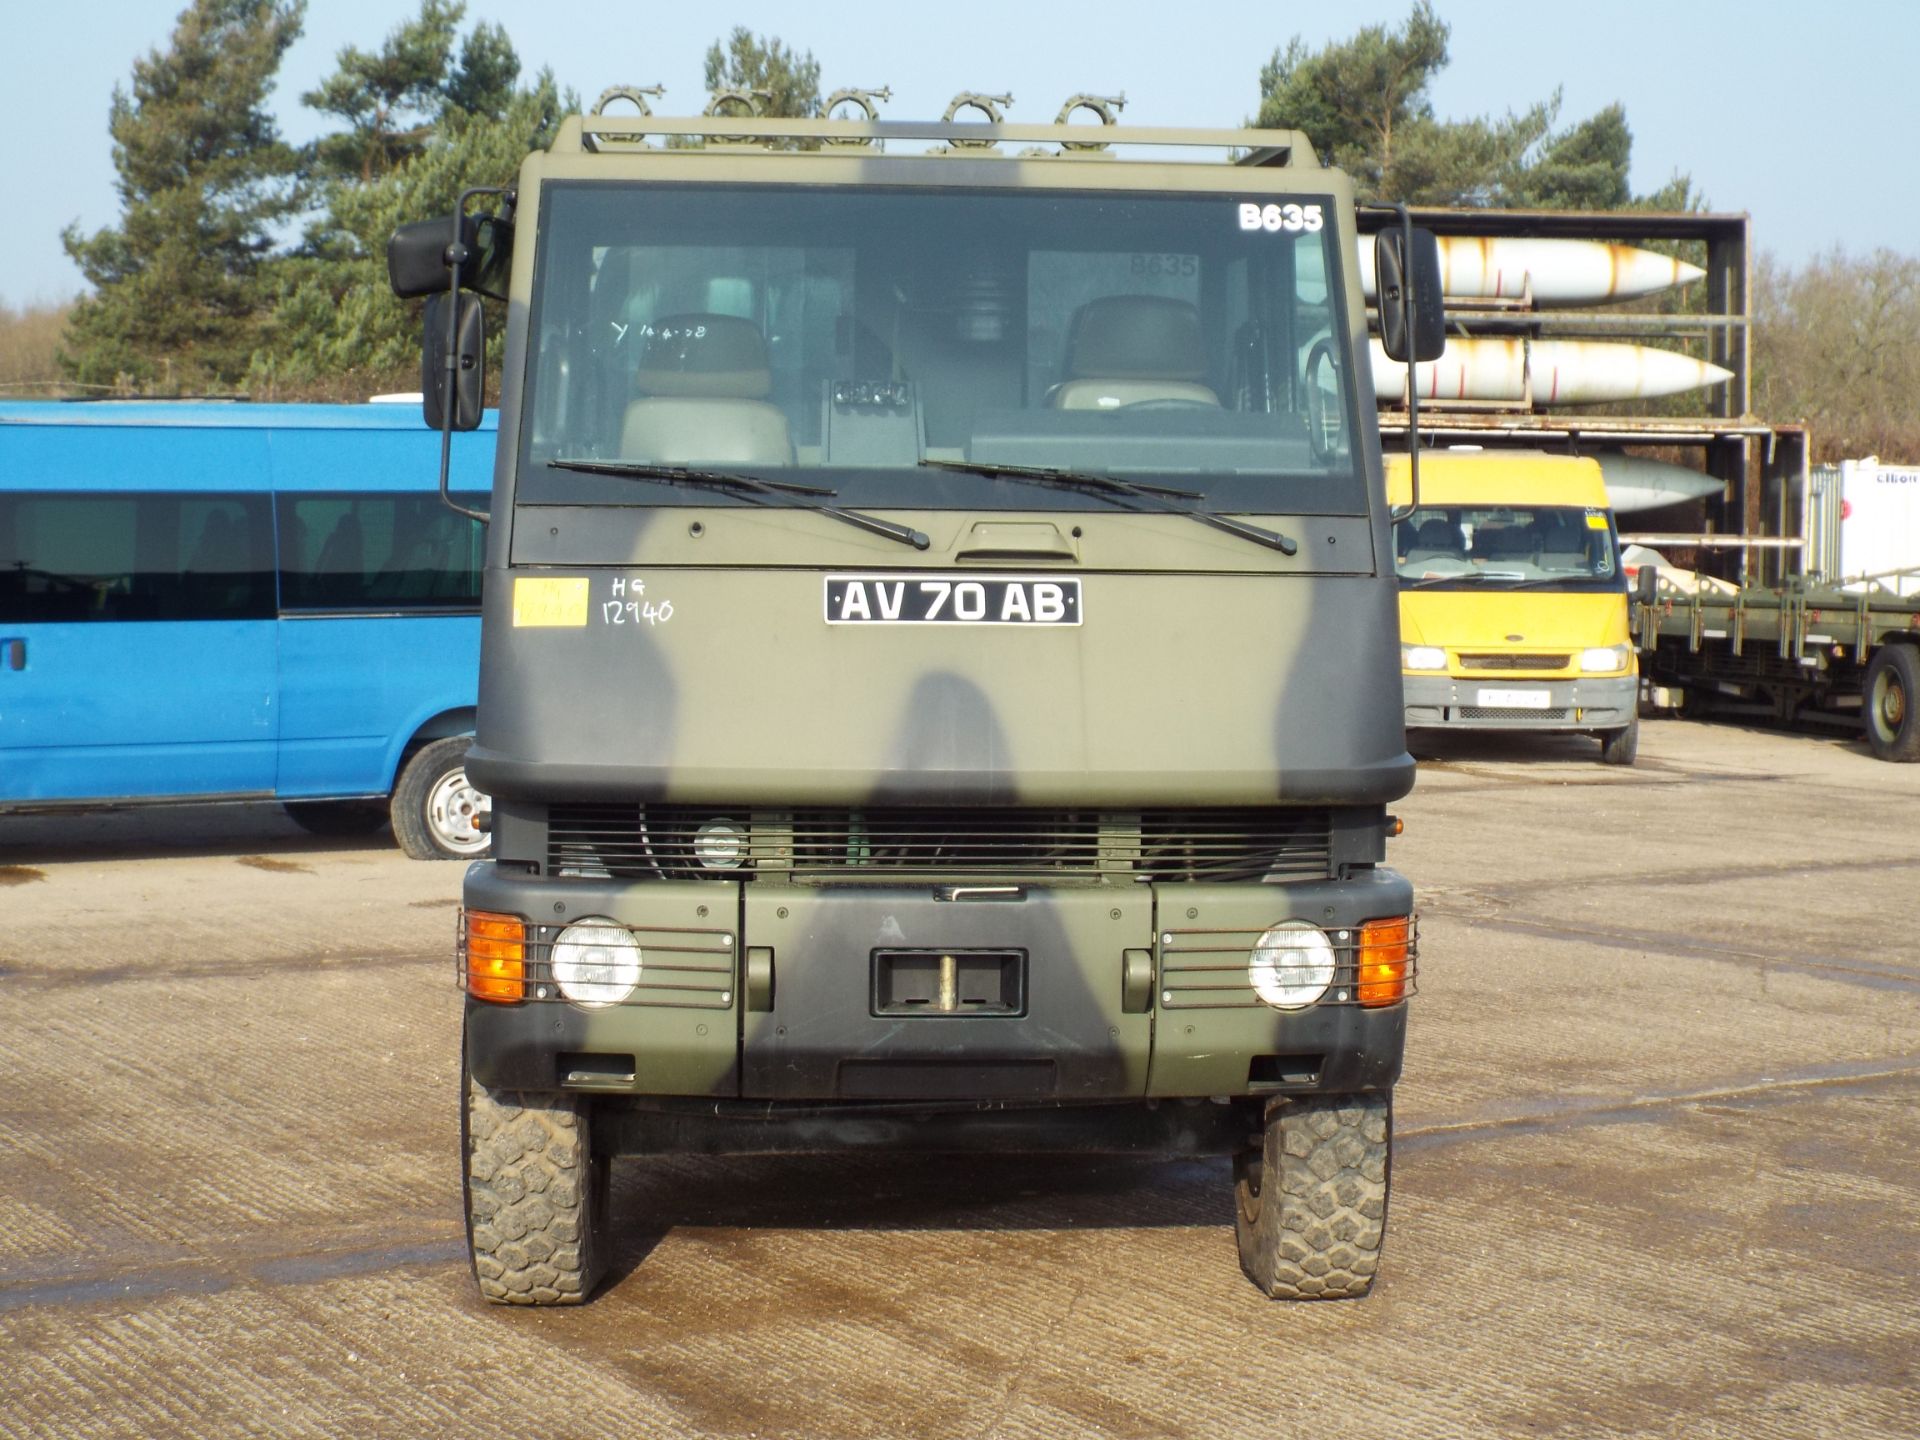 Ex Reserve Left Hand Drive Mowag Bucher Duro II 6x6 High-Mobility Tactical Vehicle - Image 2 of 31